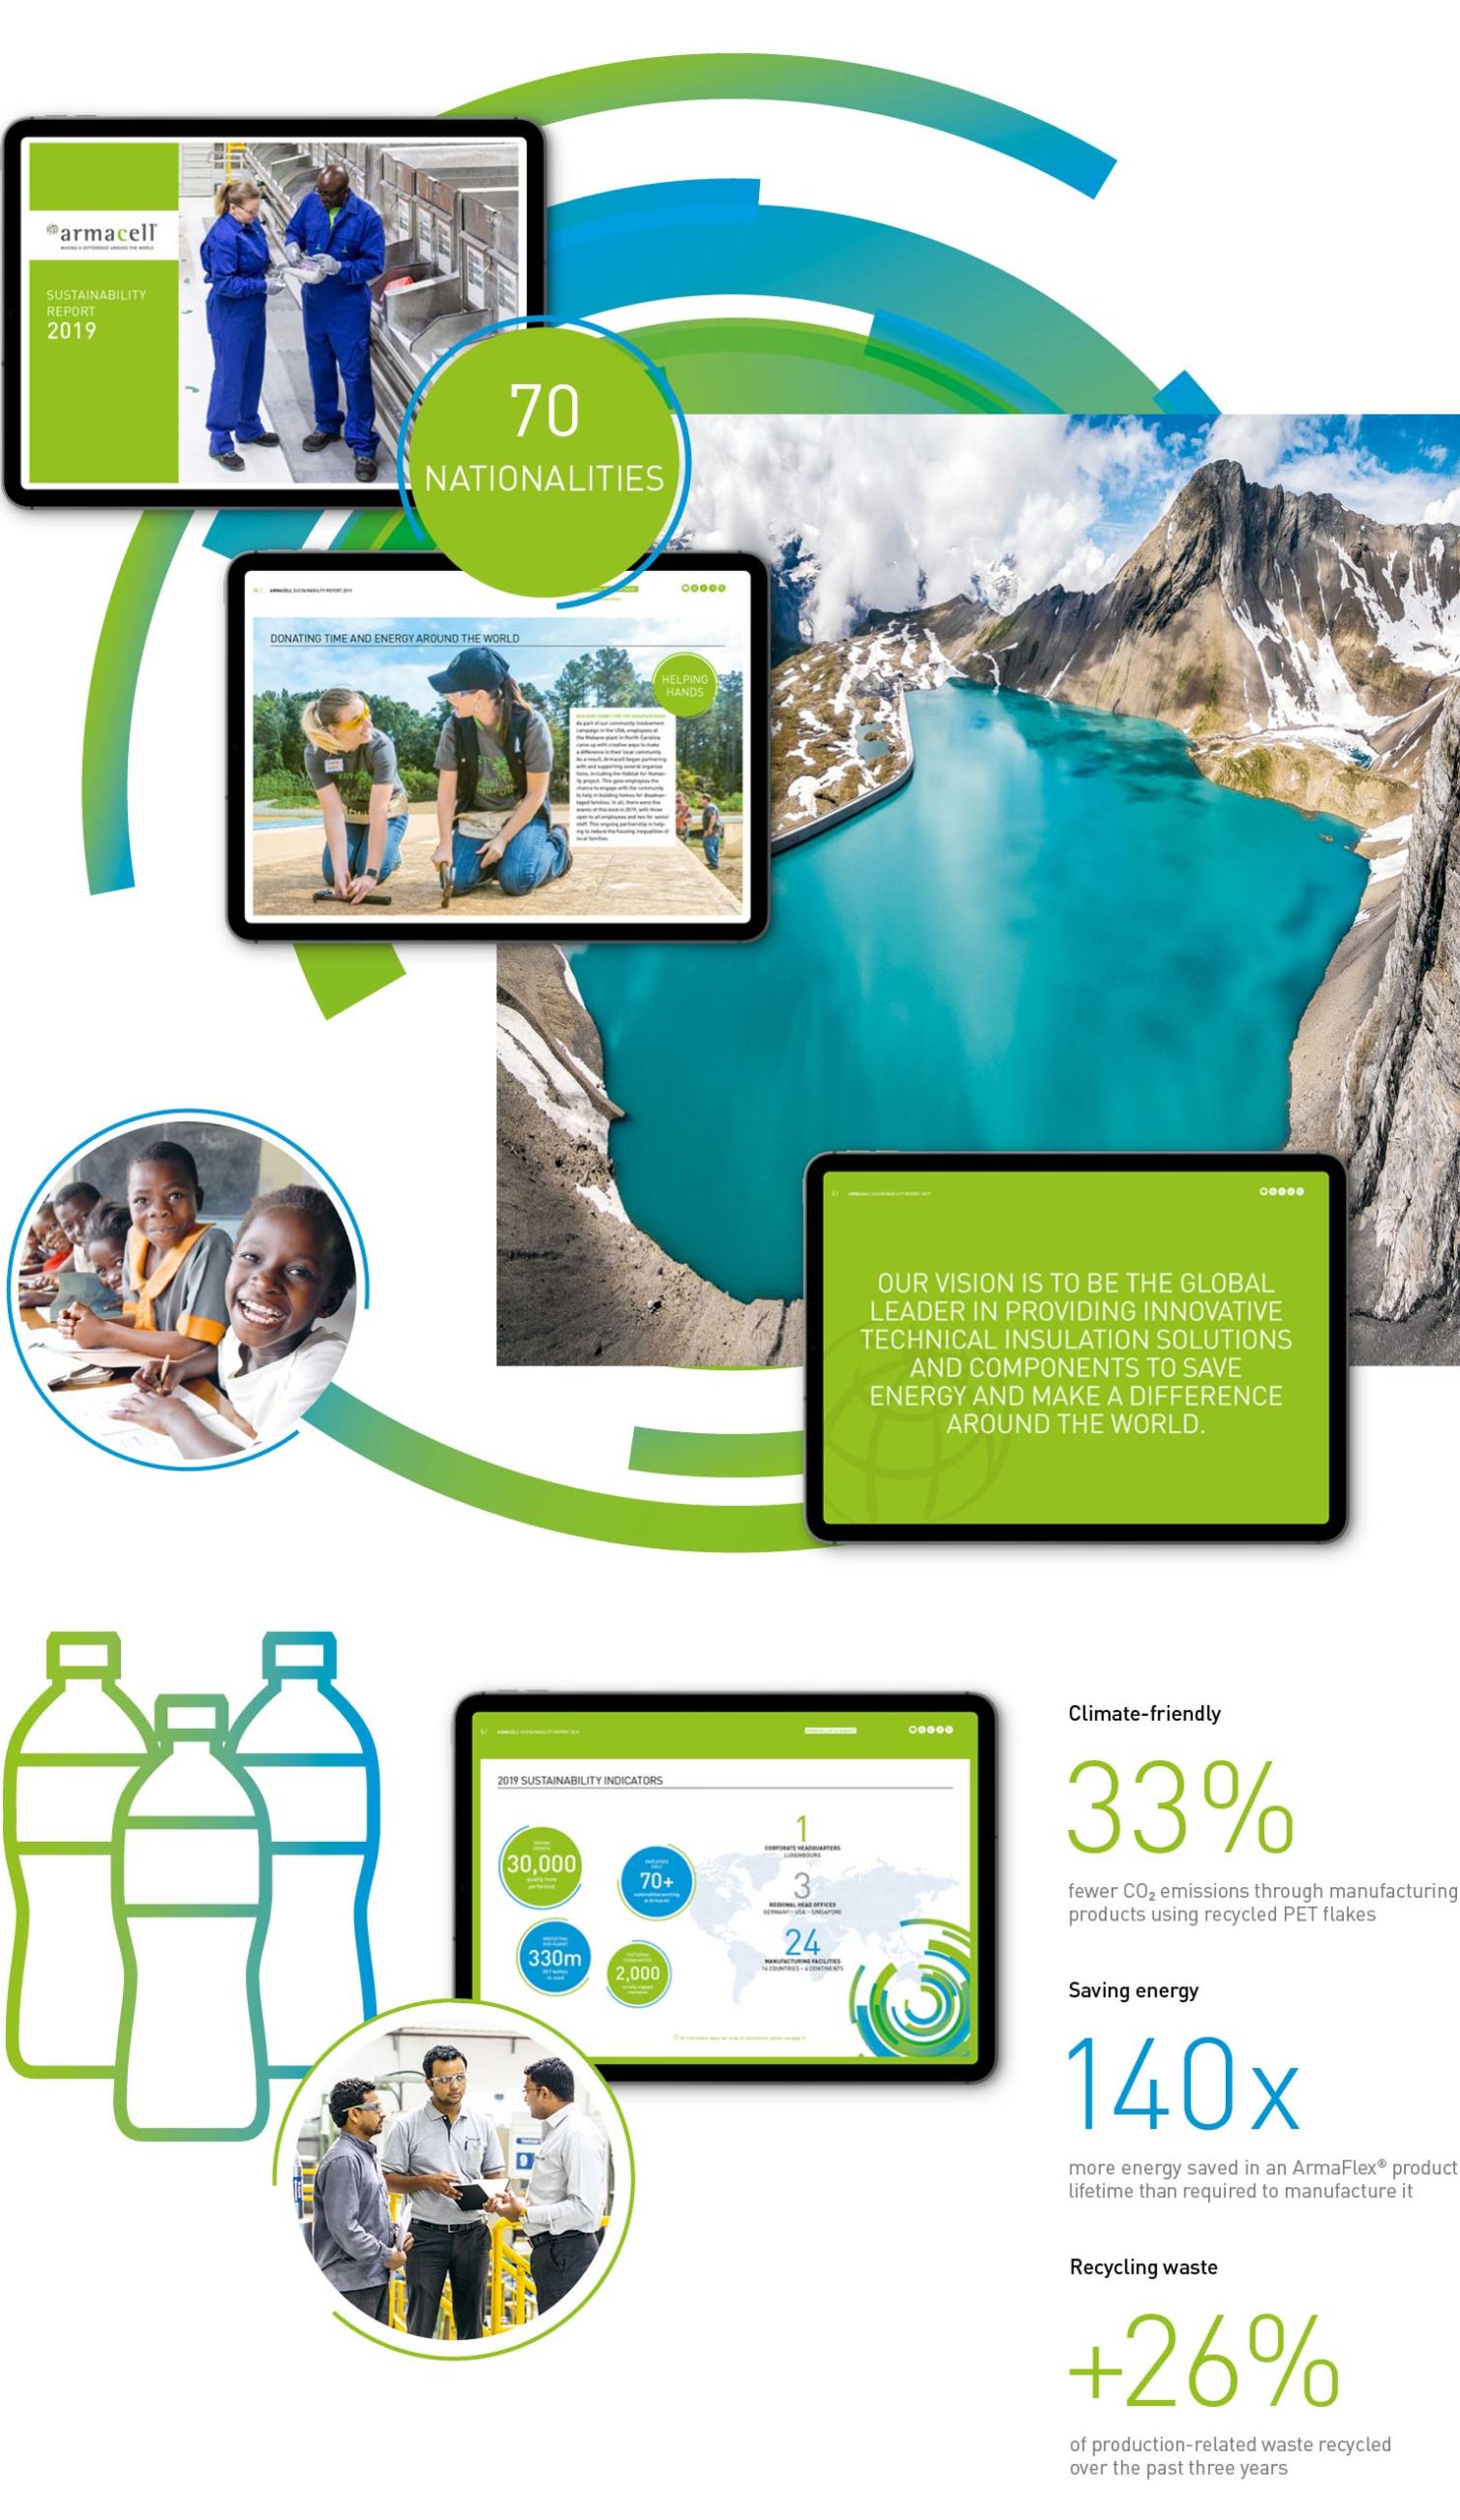 Armacell Sustainability Report 2019